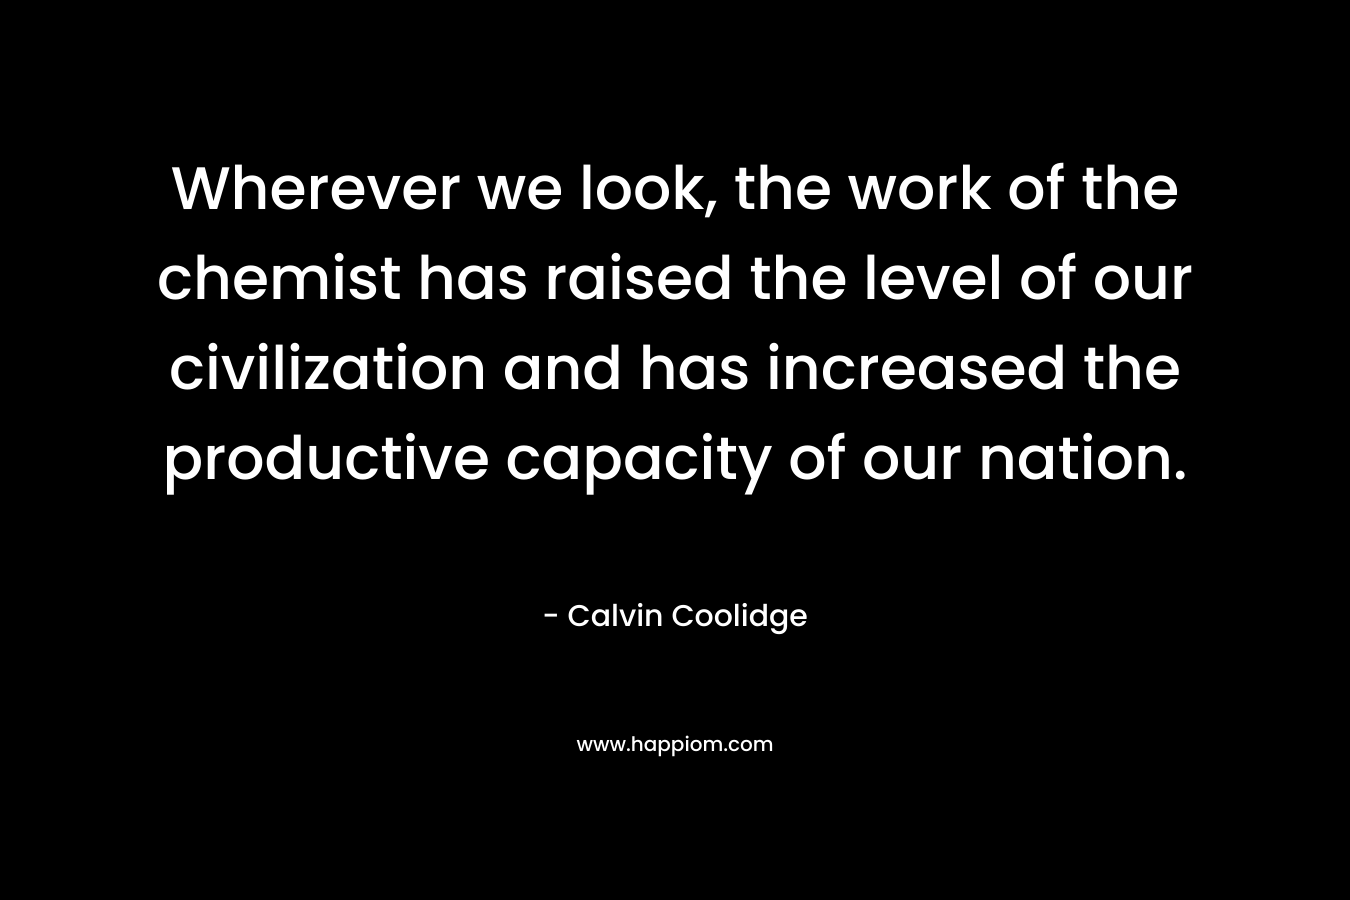 Wherever we look, the work of the chemist has raised the level of our civilization and has increased the productive capacity of our nation. – Calvin Coolidge